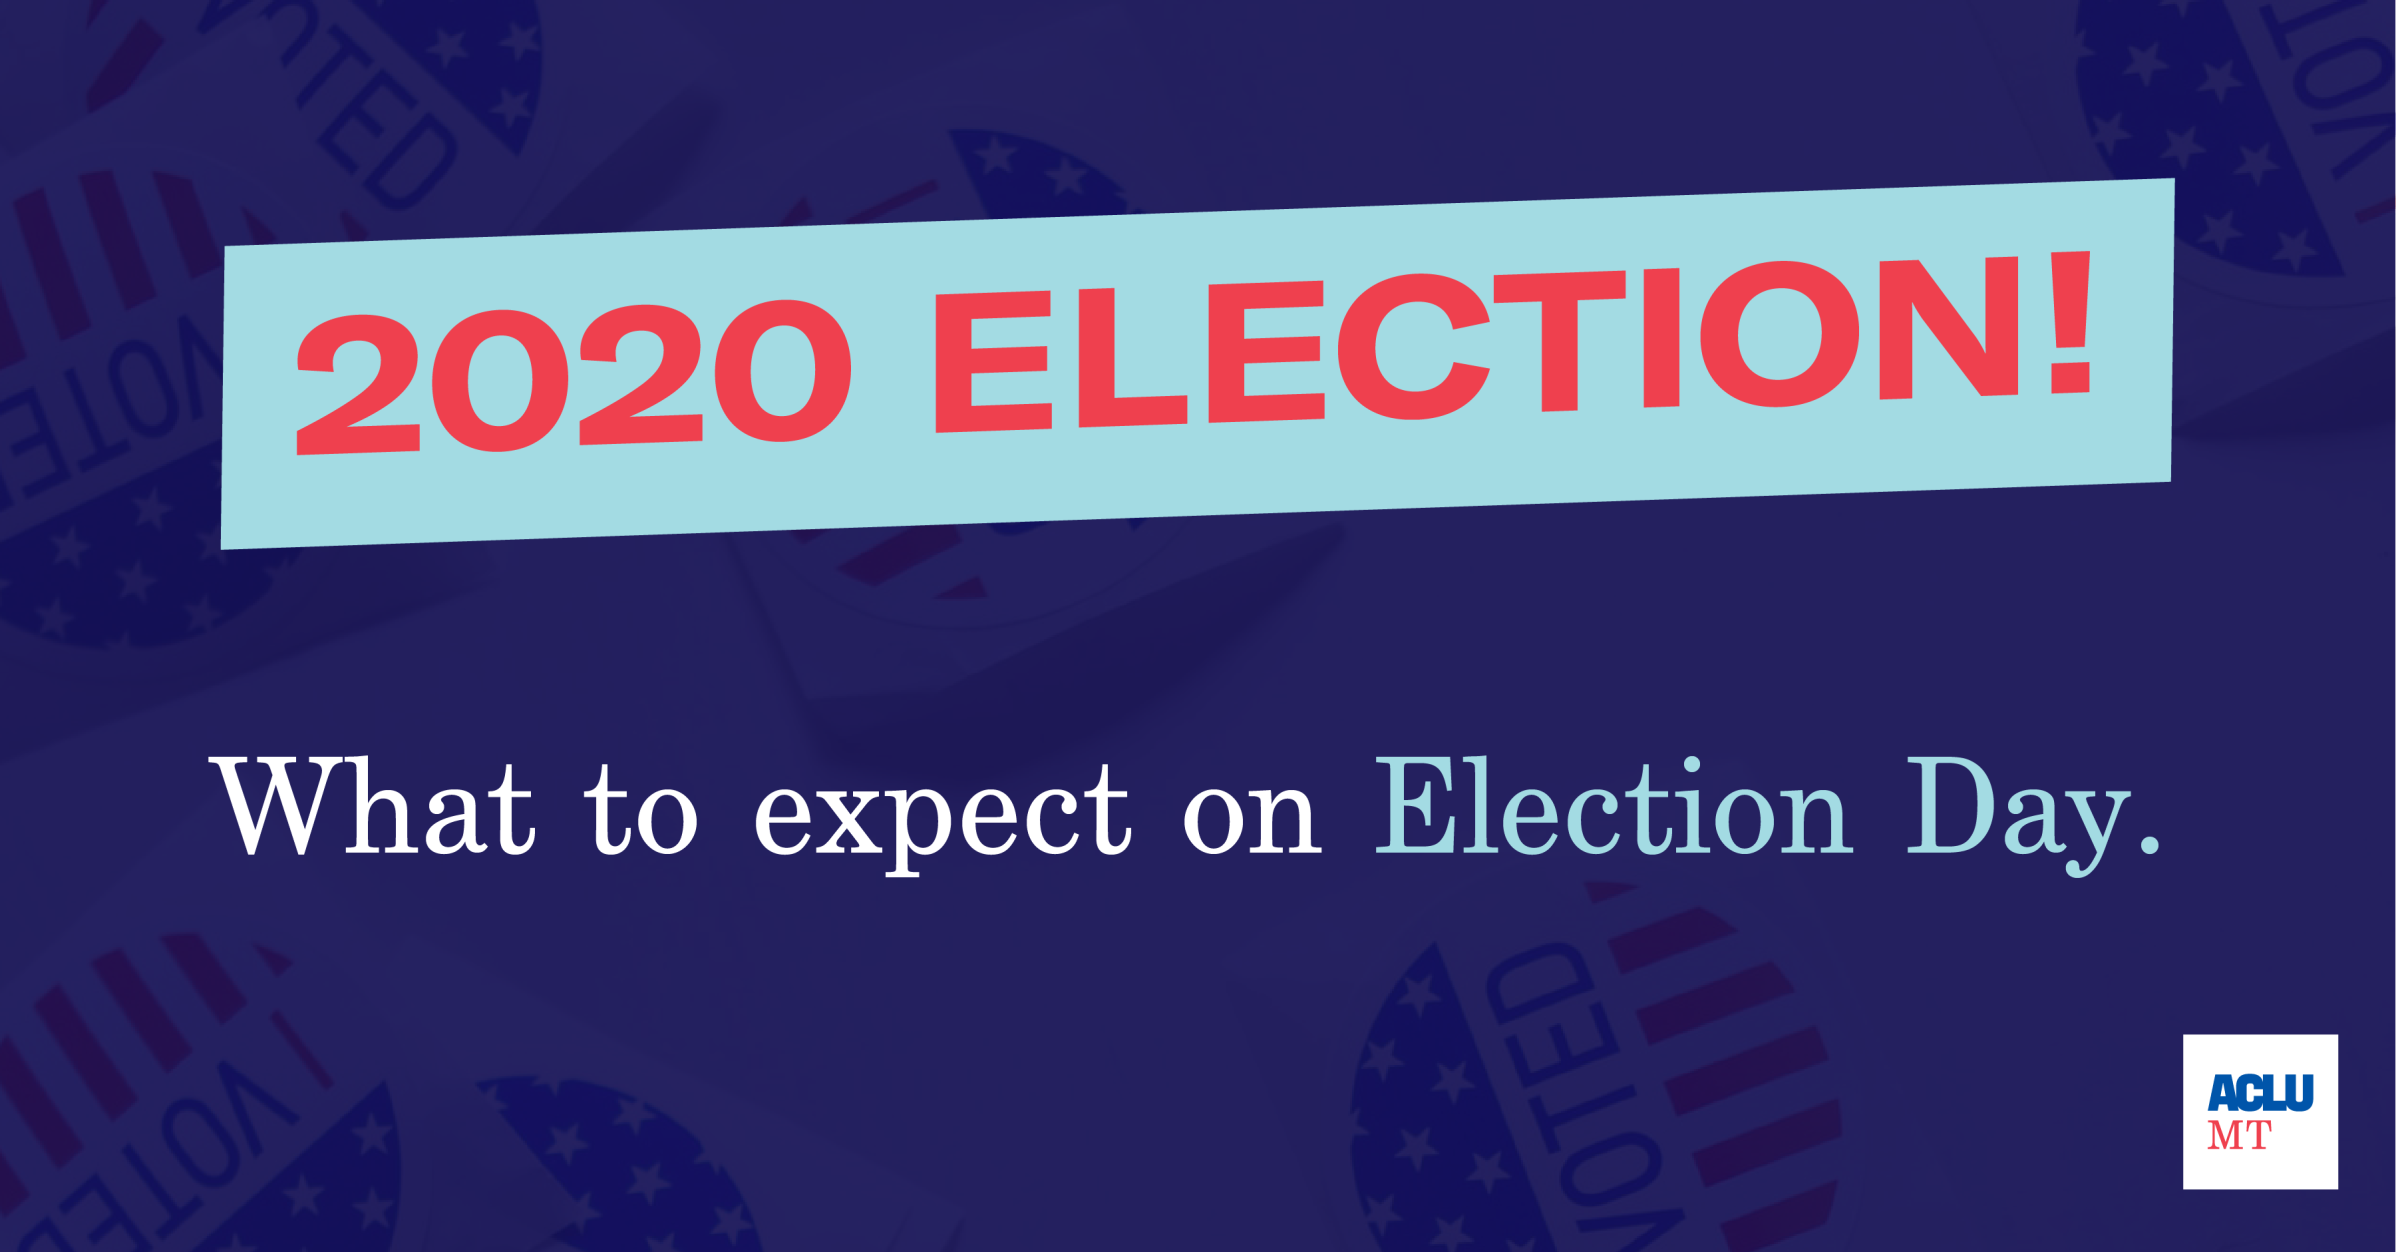 Graphic of 2020 Election Election Day